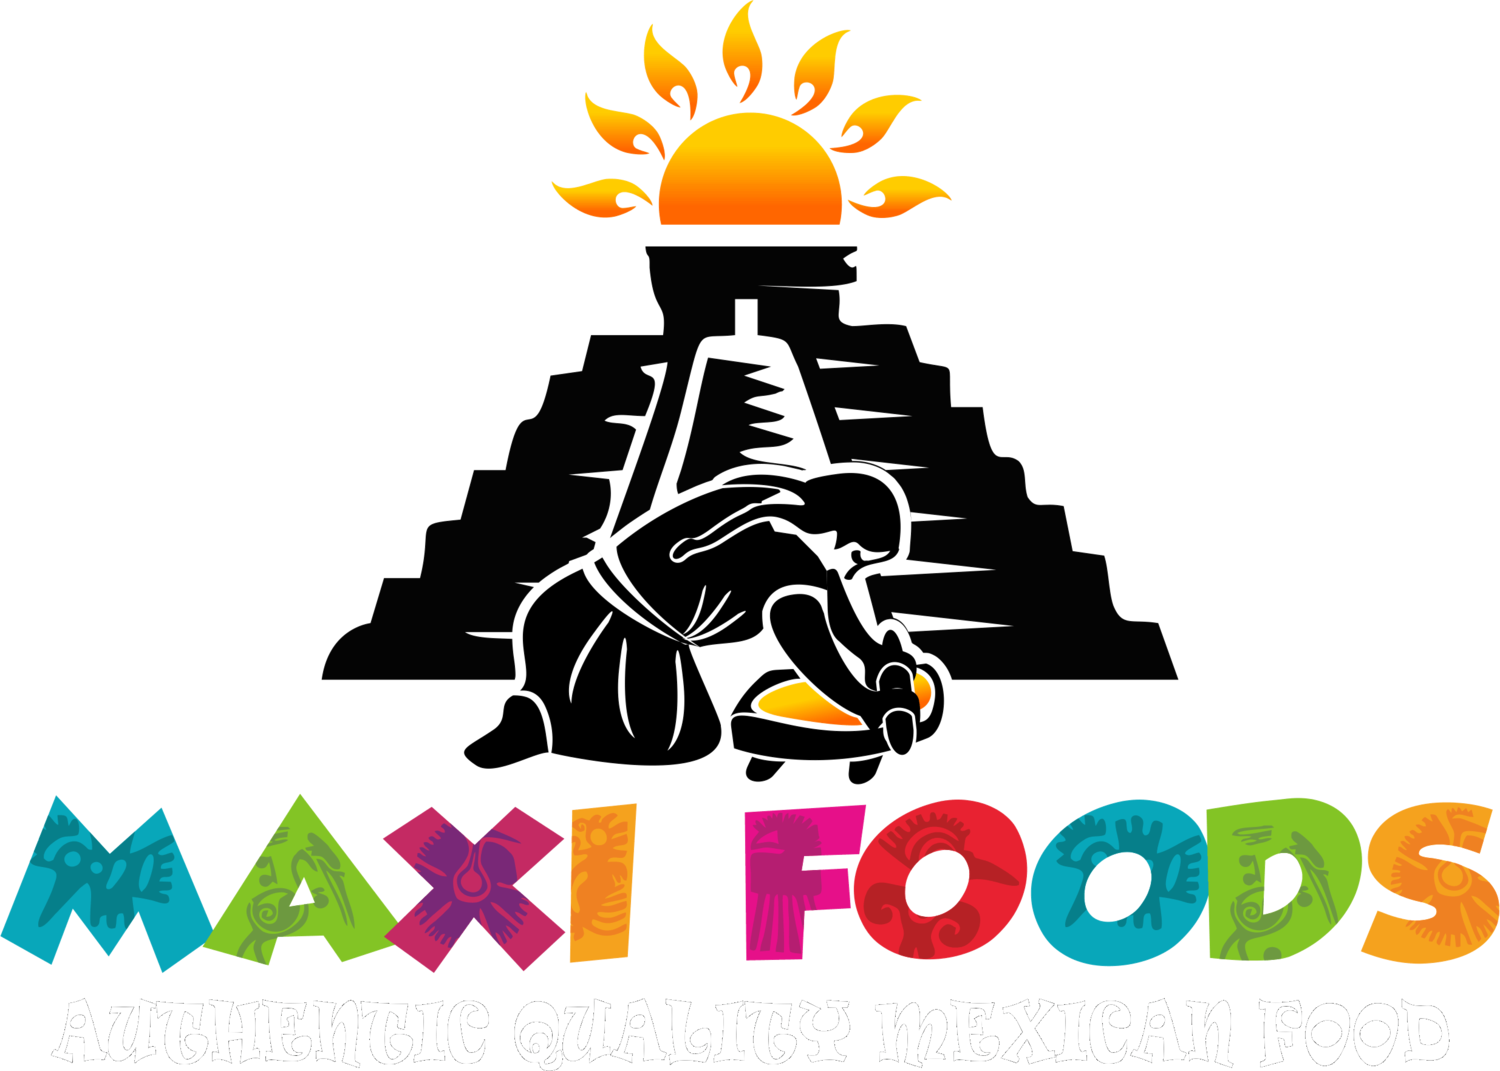 Maxi Foods - Authentic Quality Mexican Food